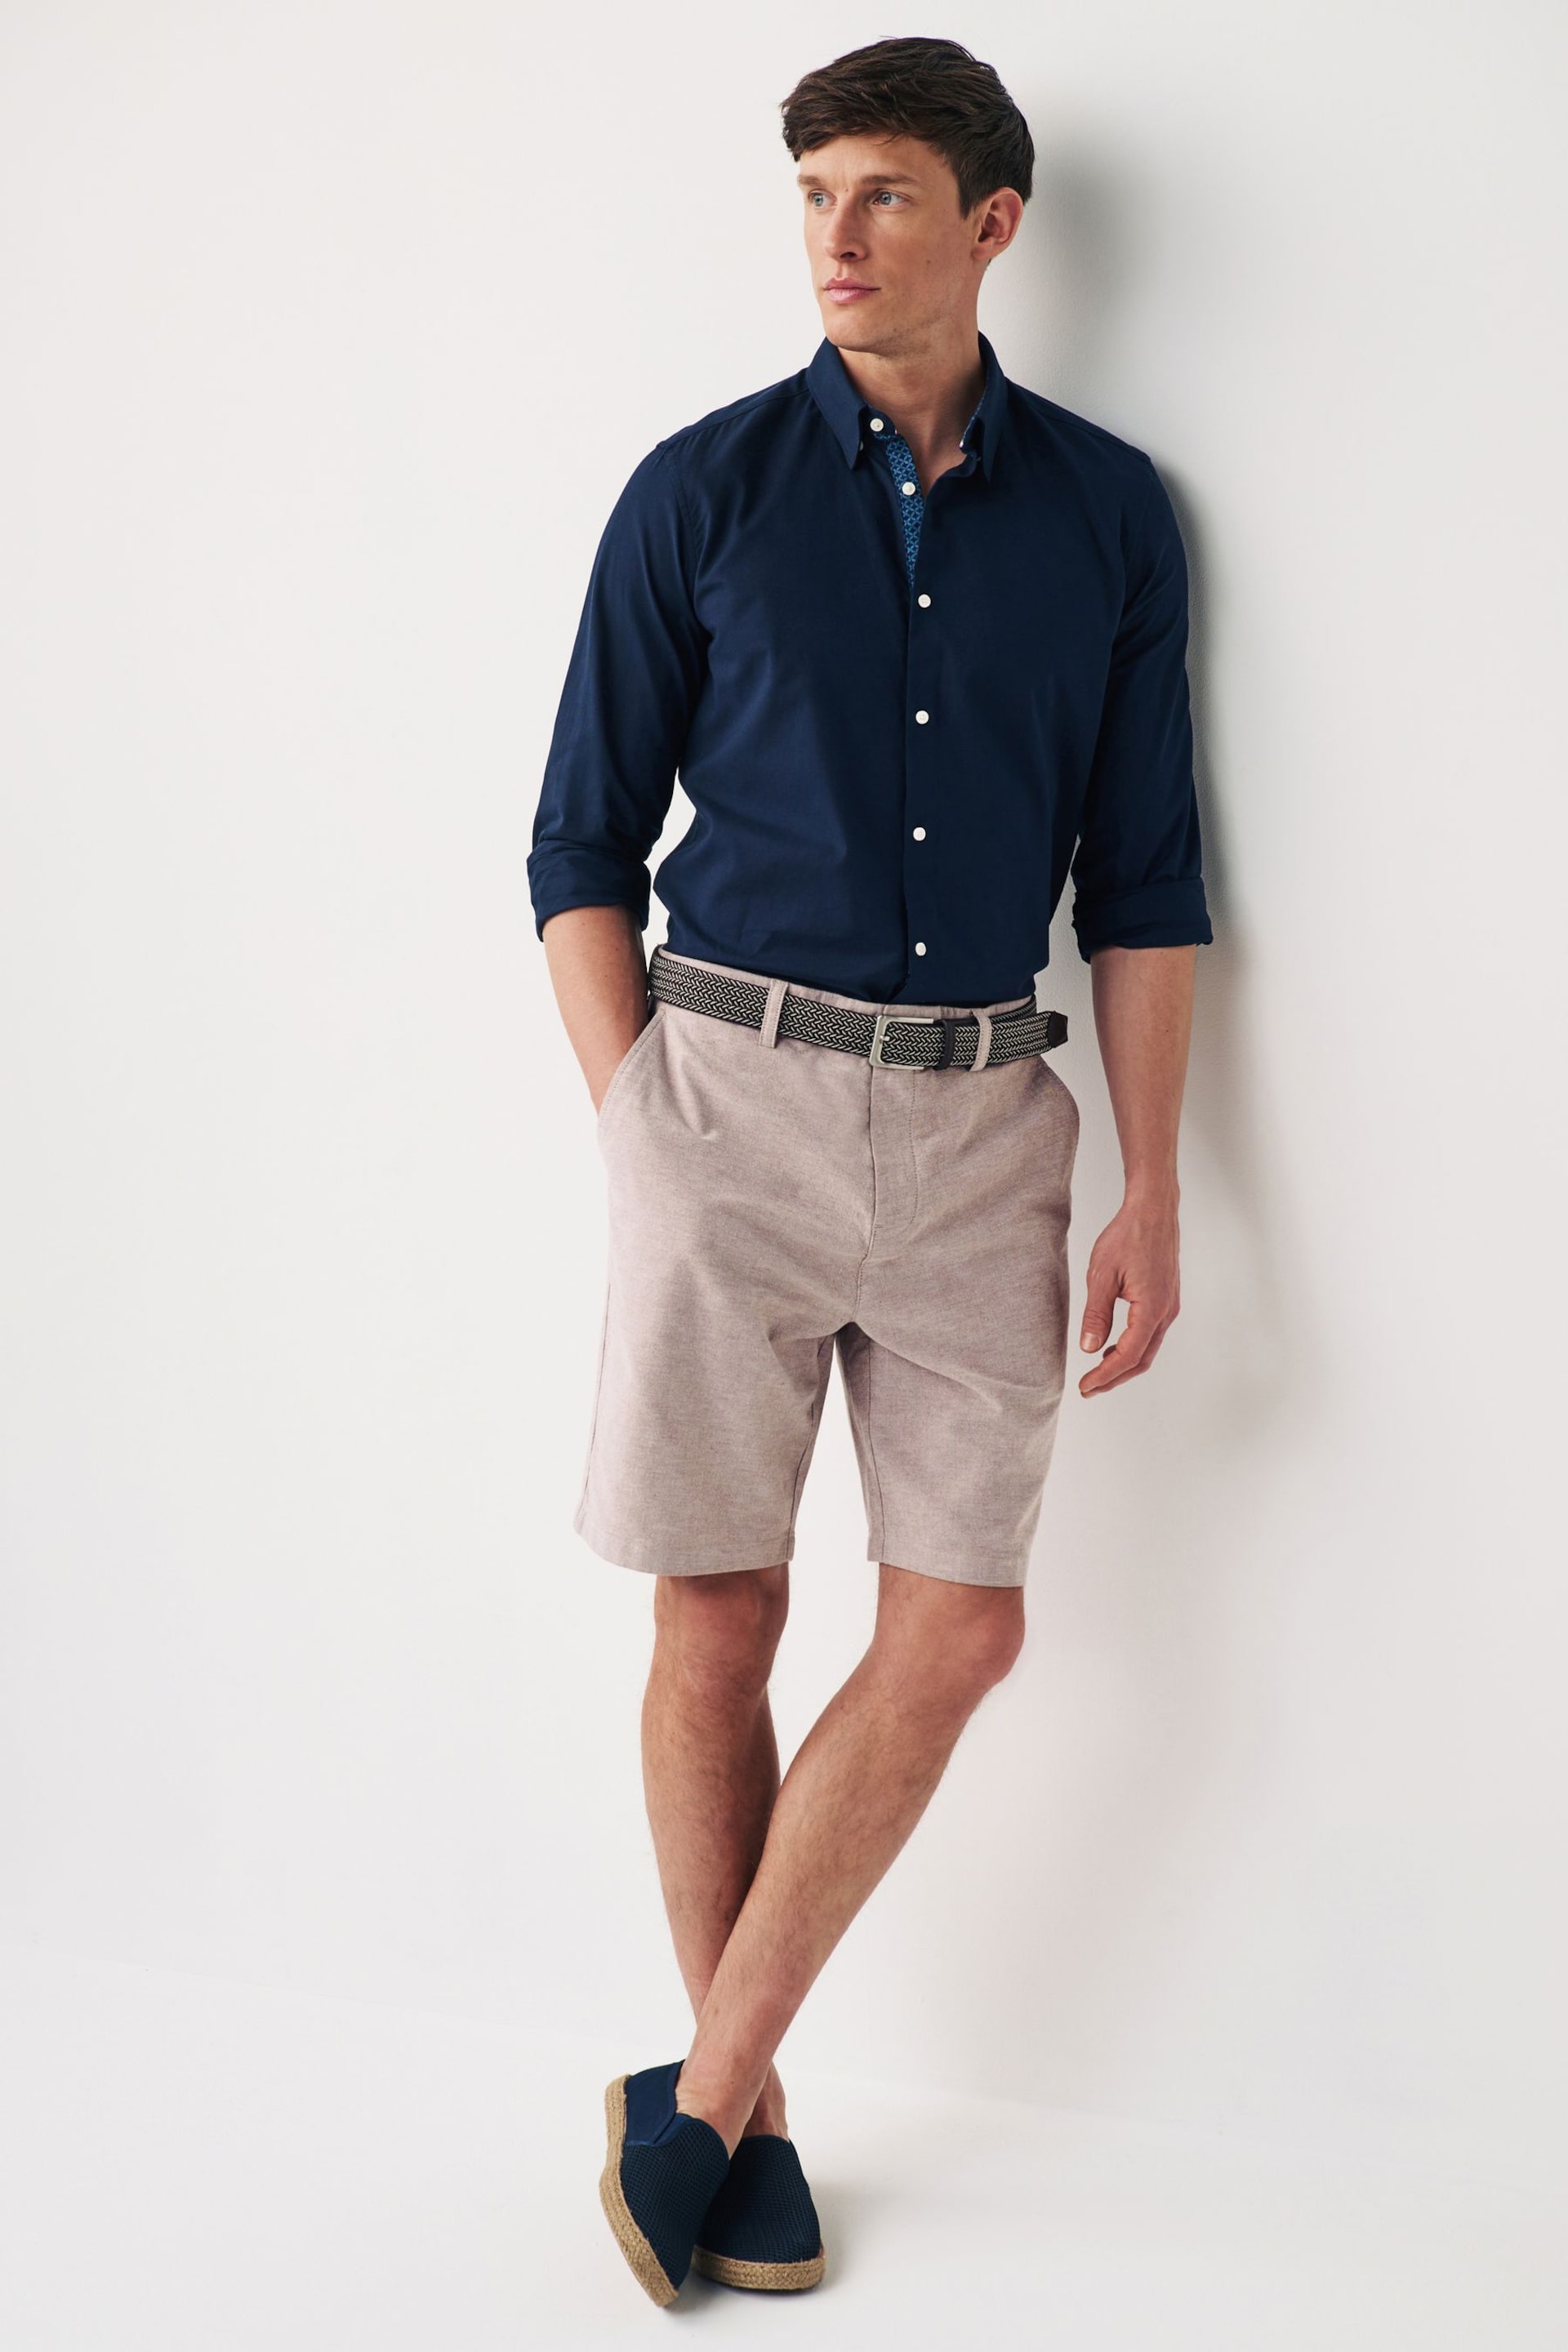 Clay Cotton Oxford Chino Shorts with Belt Included - Image 2 of 7